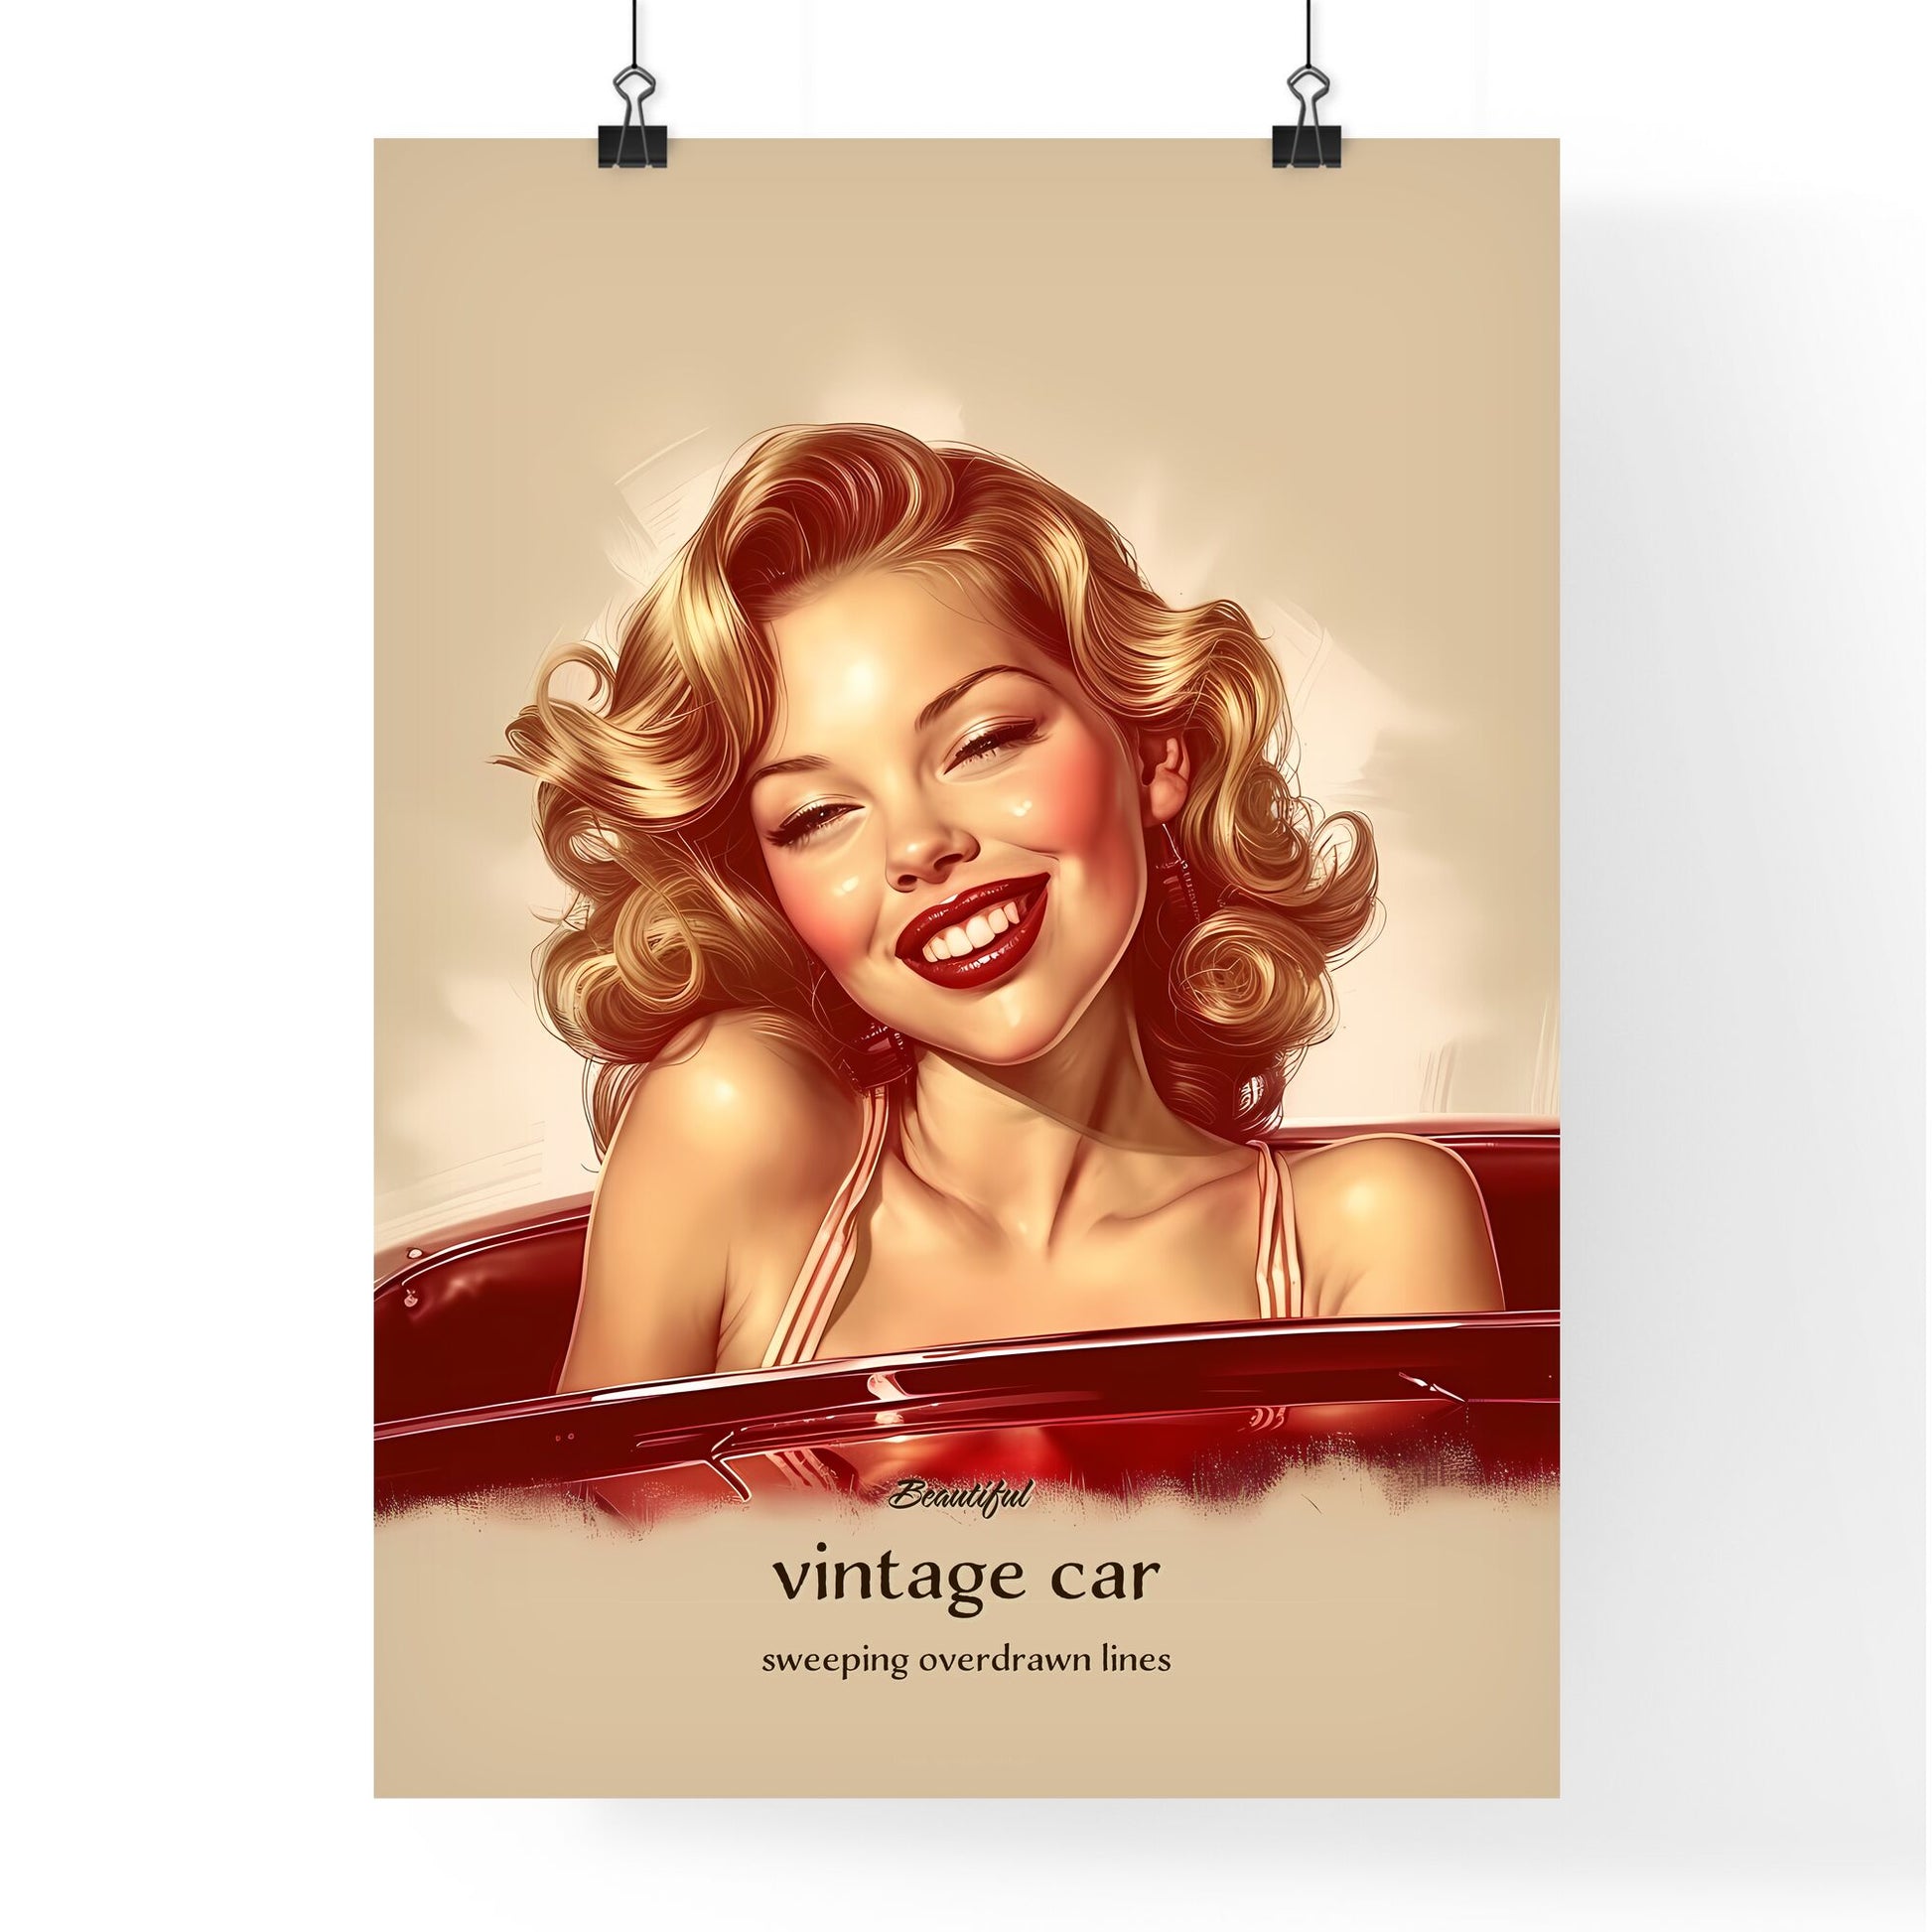 Beautiful, vintage car, sweeping overdrawn lines, A Poster of a woman smiling in a car Default Title